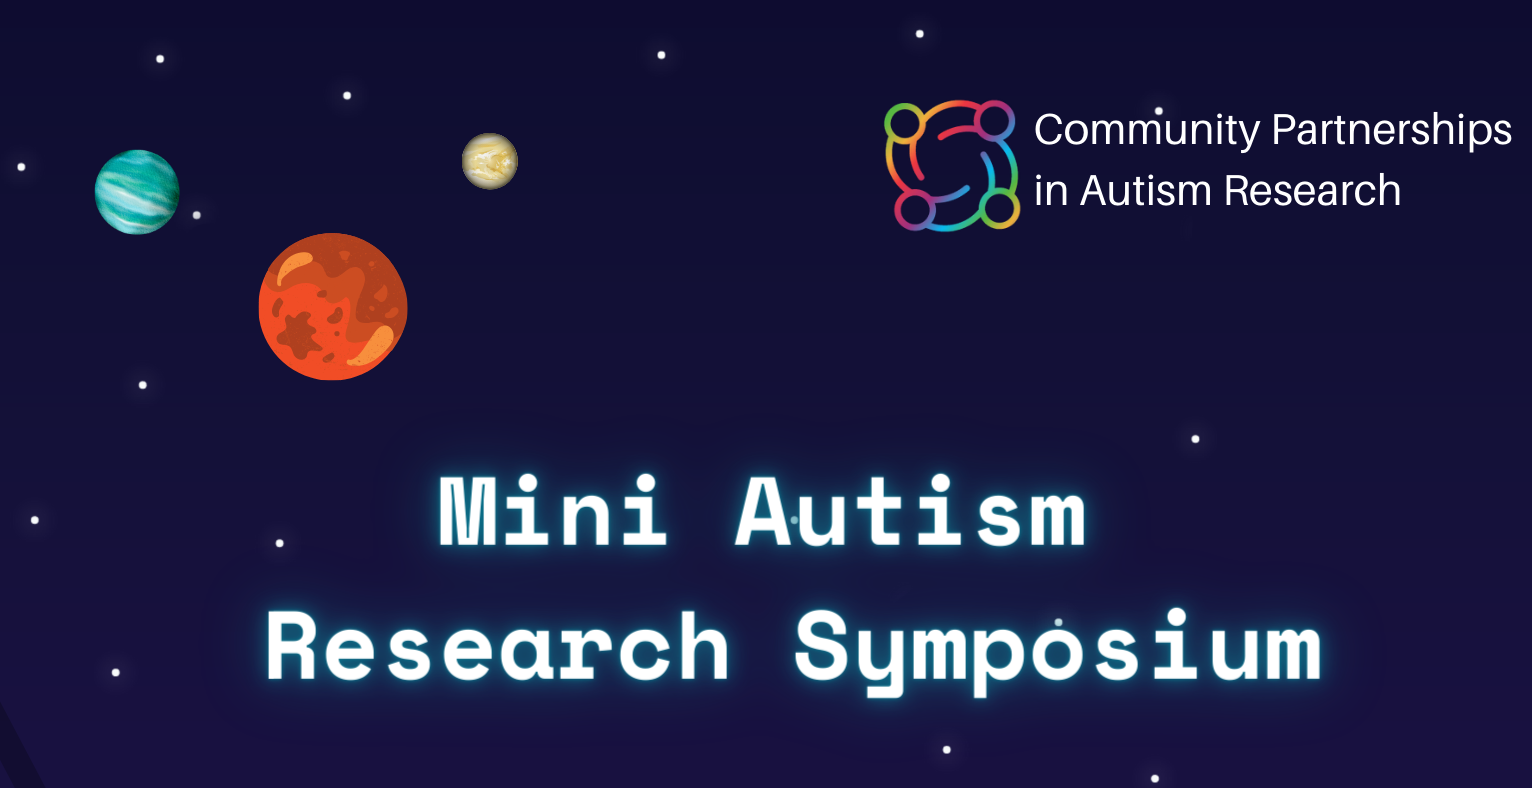 Space with planets and stars. Text: Mini-Autism Research Symposium